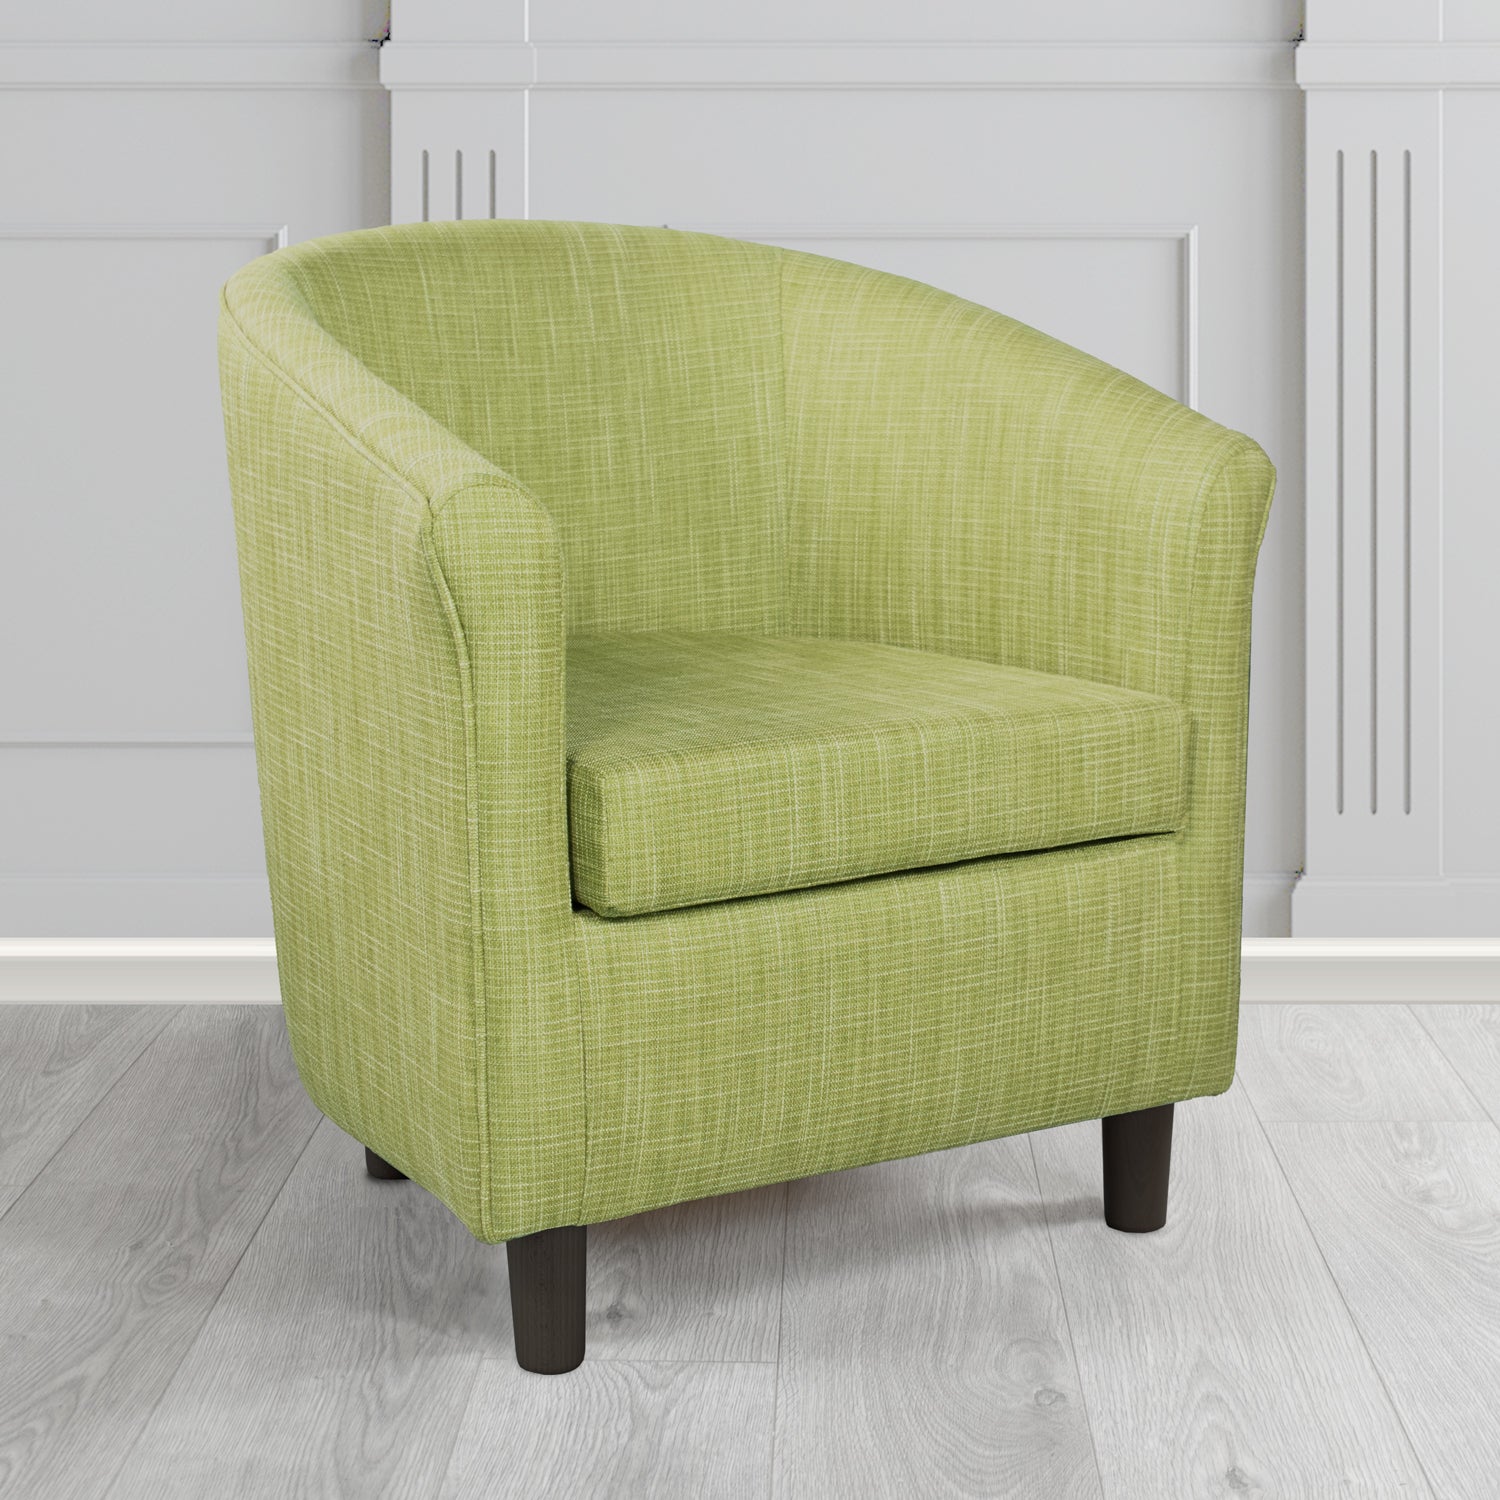 Tuscany Ravel Guacamole Contract Crib 5 Fabric Tub Chair - Antimicrobial & Water-Resistant - The Tub Chair Shop